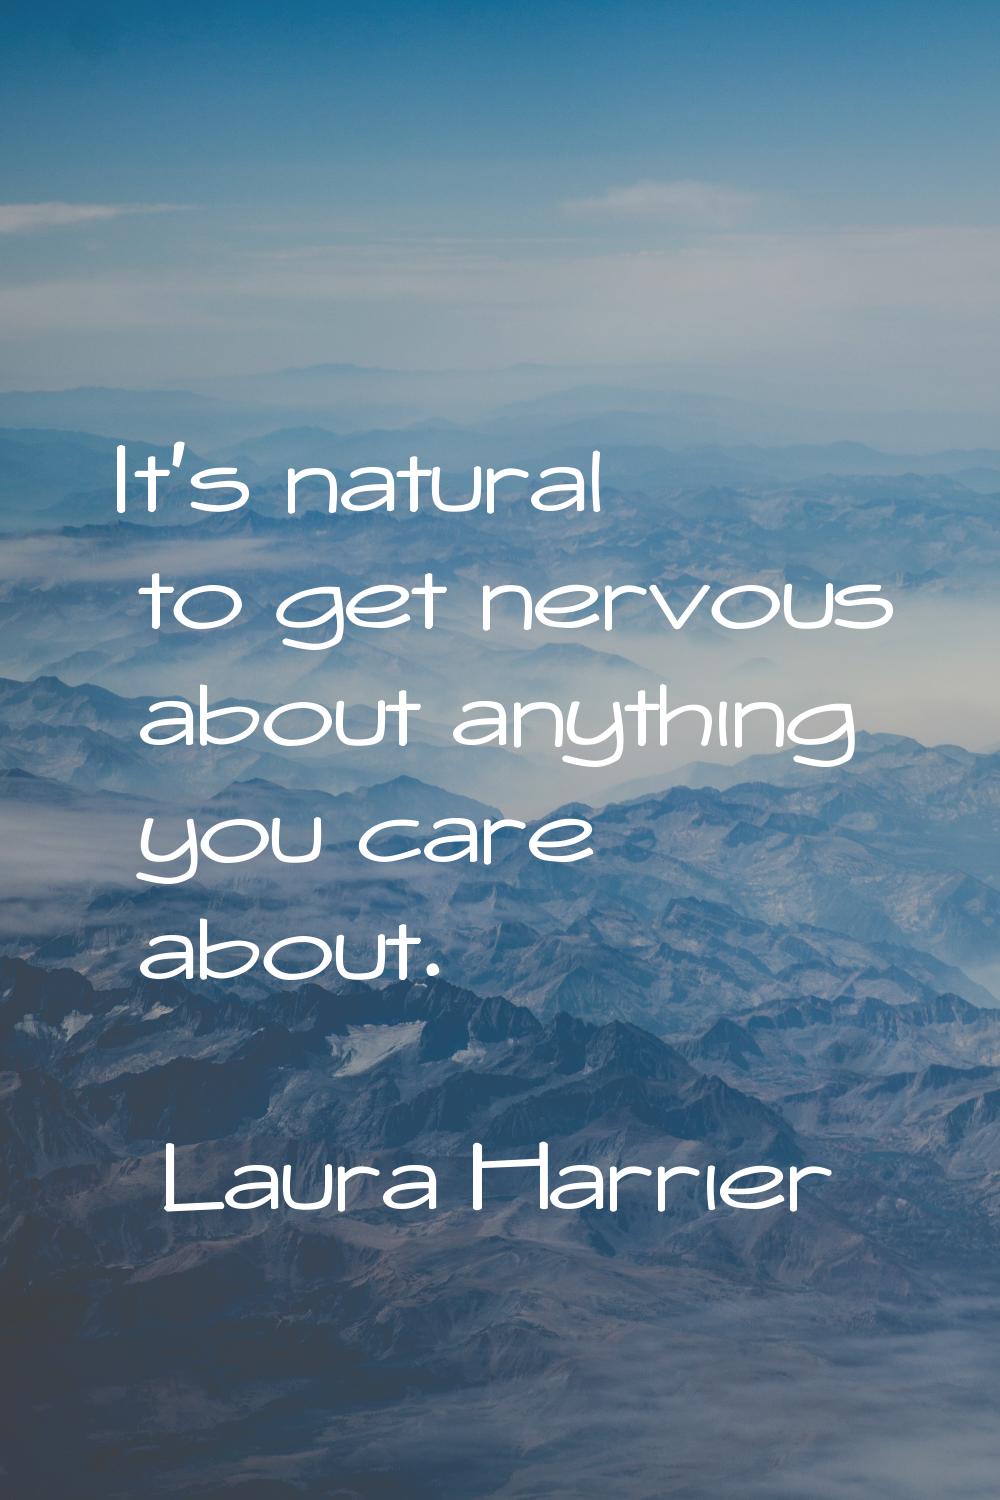 It's natural to get nervous about anything you care about.